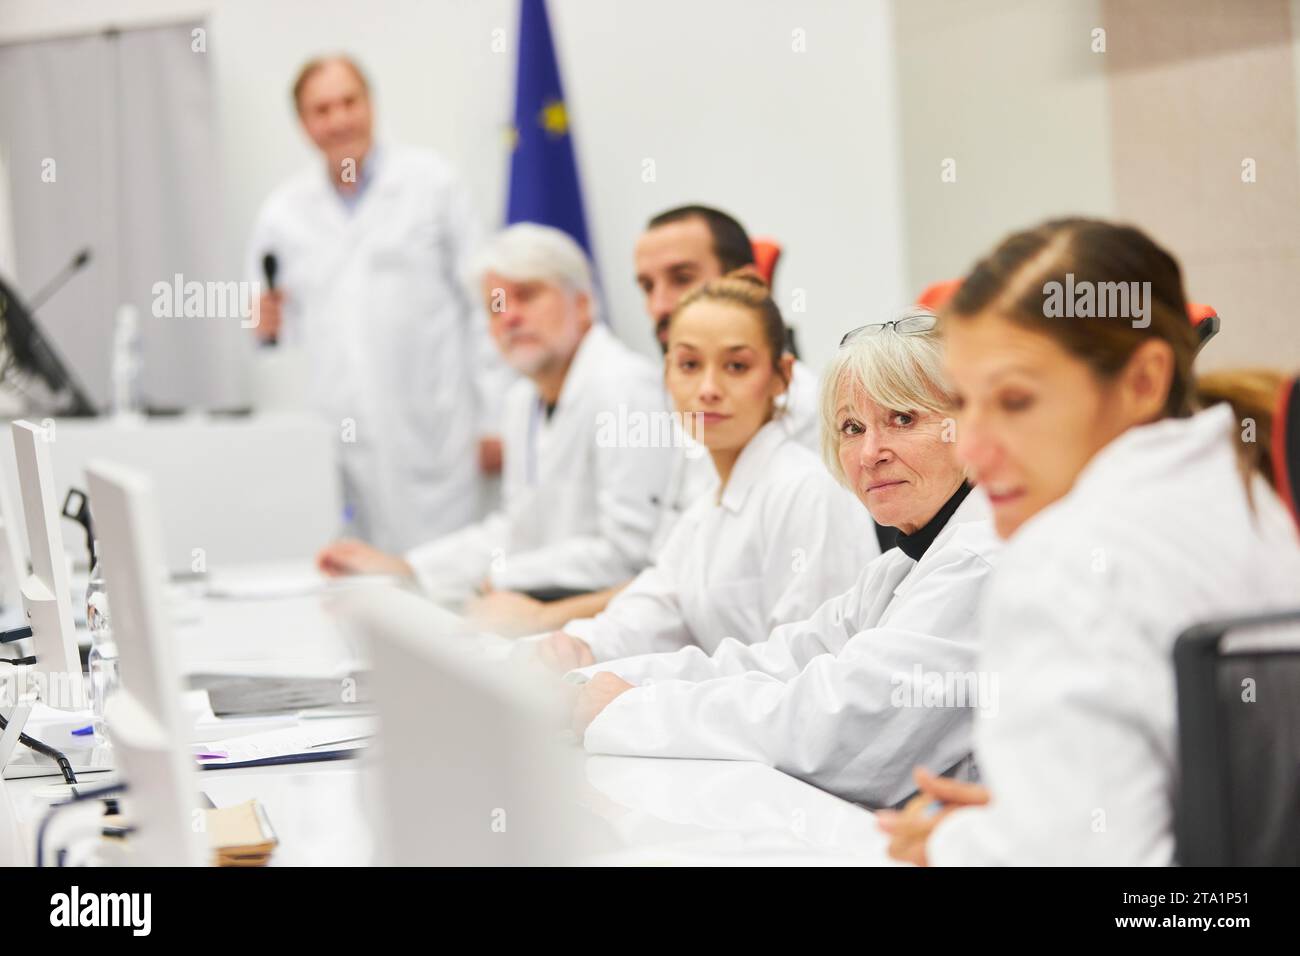 Speaker panel with male and female doctors at medical health care conference Stock Photo